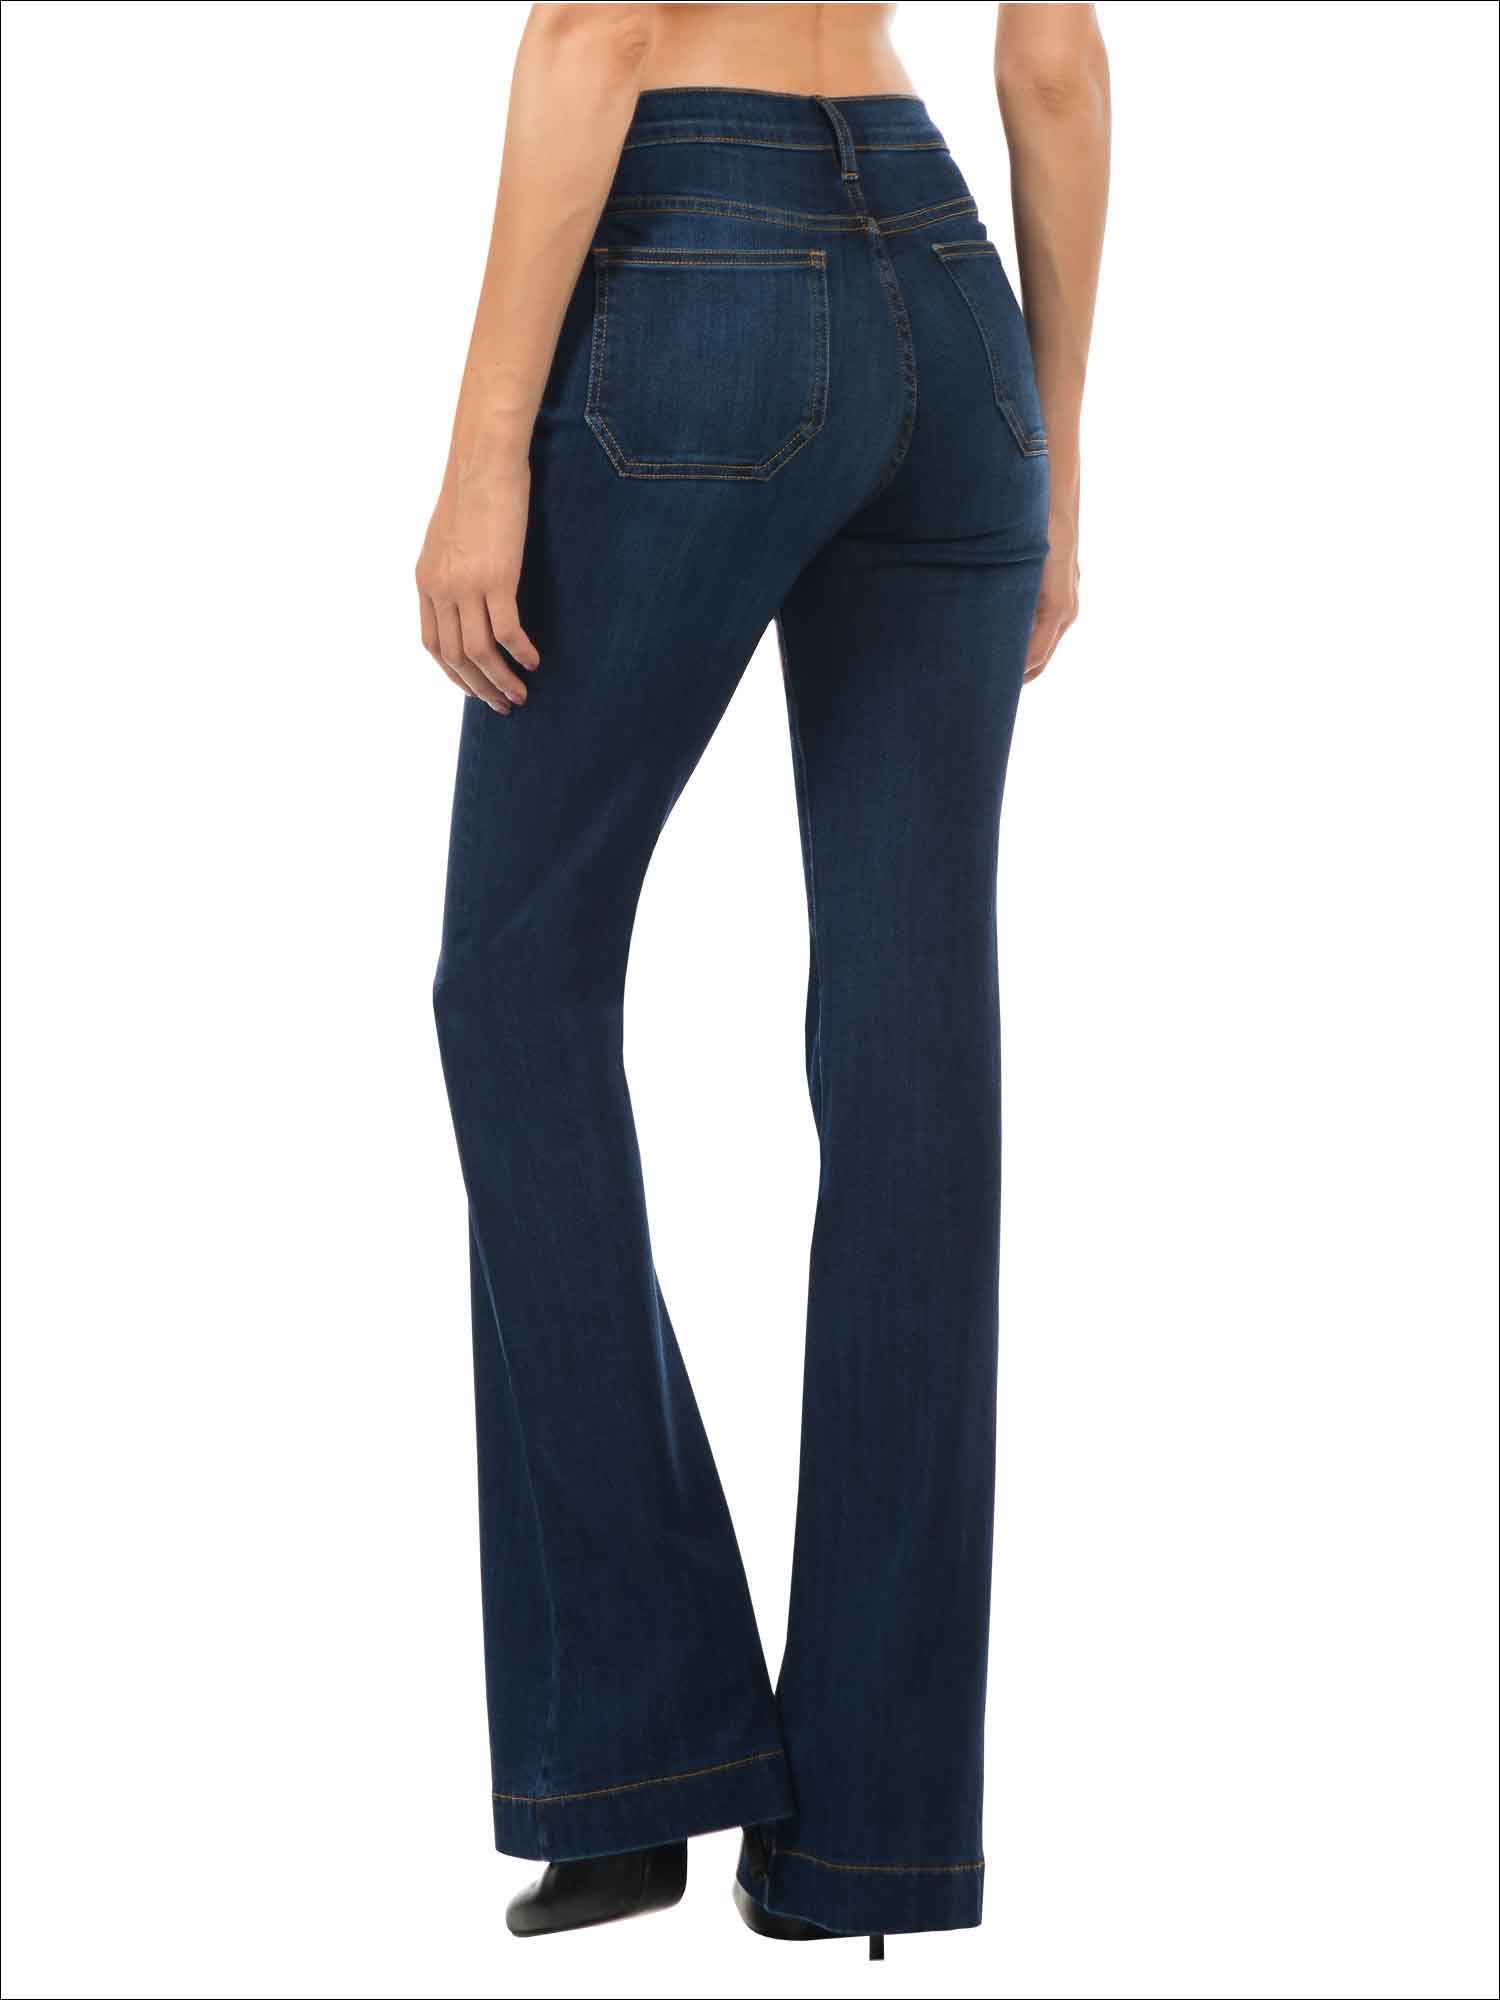 FUN PATCH POCKET FLARE JEANS